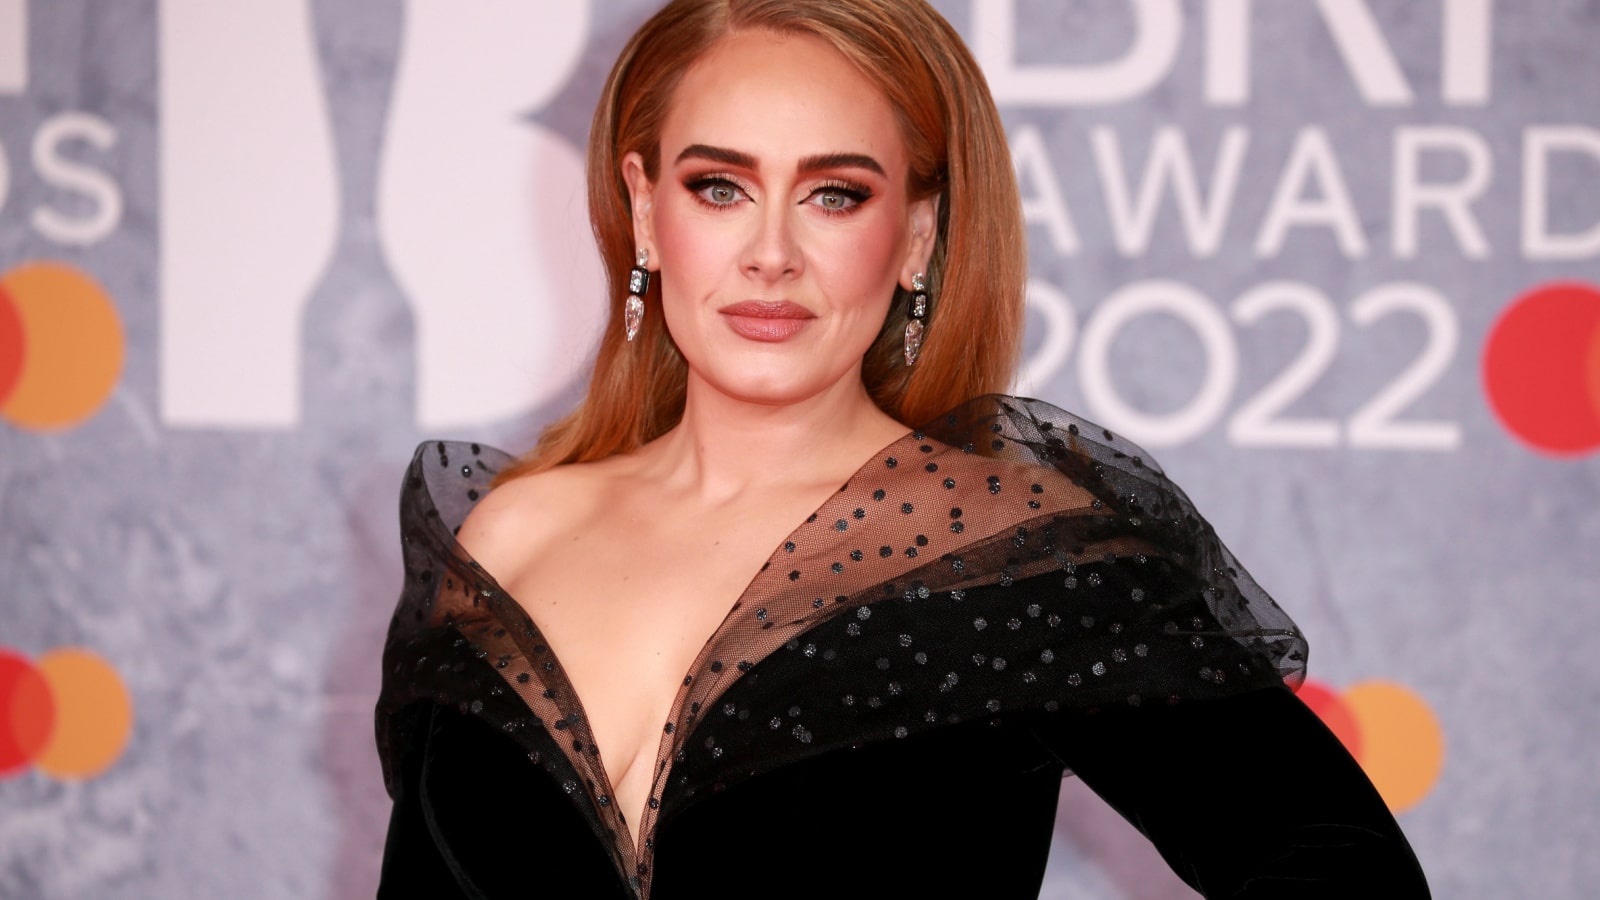 London, United Kingdom - February 08, 2022: Adele attends The BRIT Awards 2022 at The O2 Arena on February 08, 2022 in London, England.